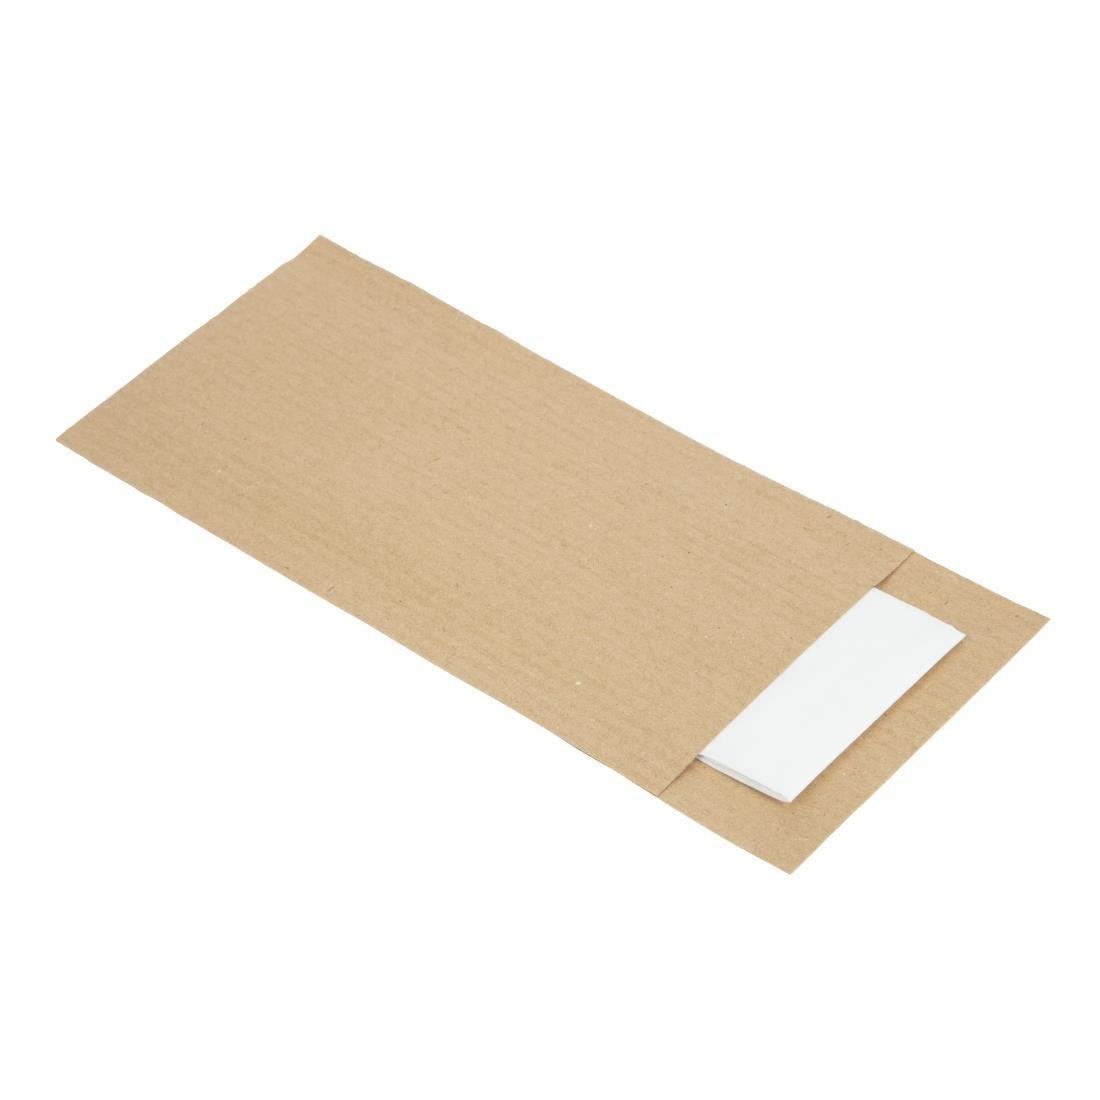 CK235 Europochette Brown Cutlery Pouch with White Napkin (Pack of 500) JD Catering Equipment Solutions Ltd